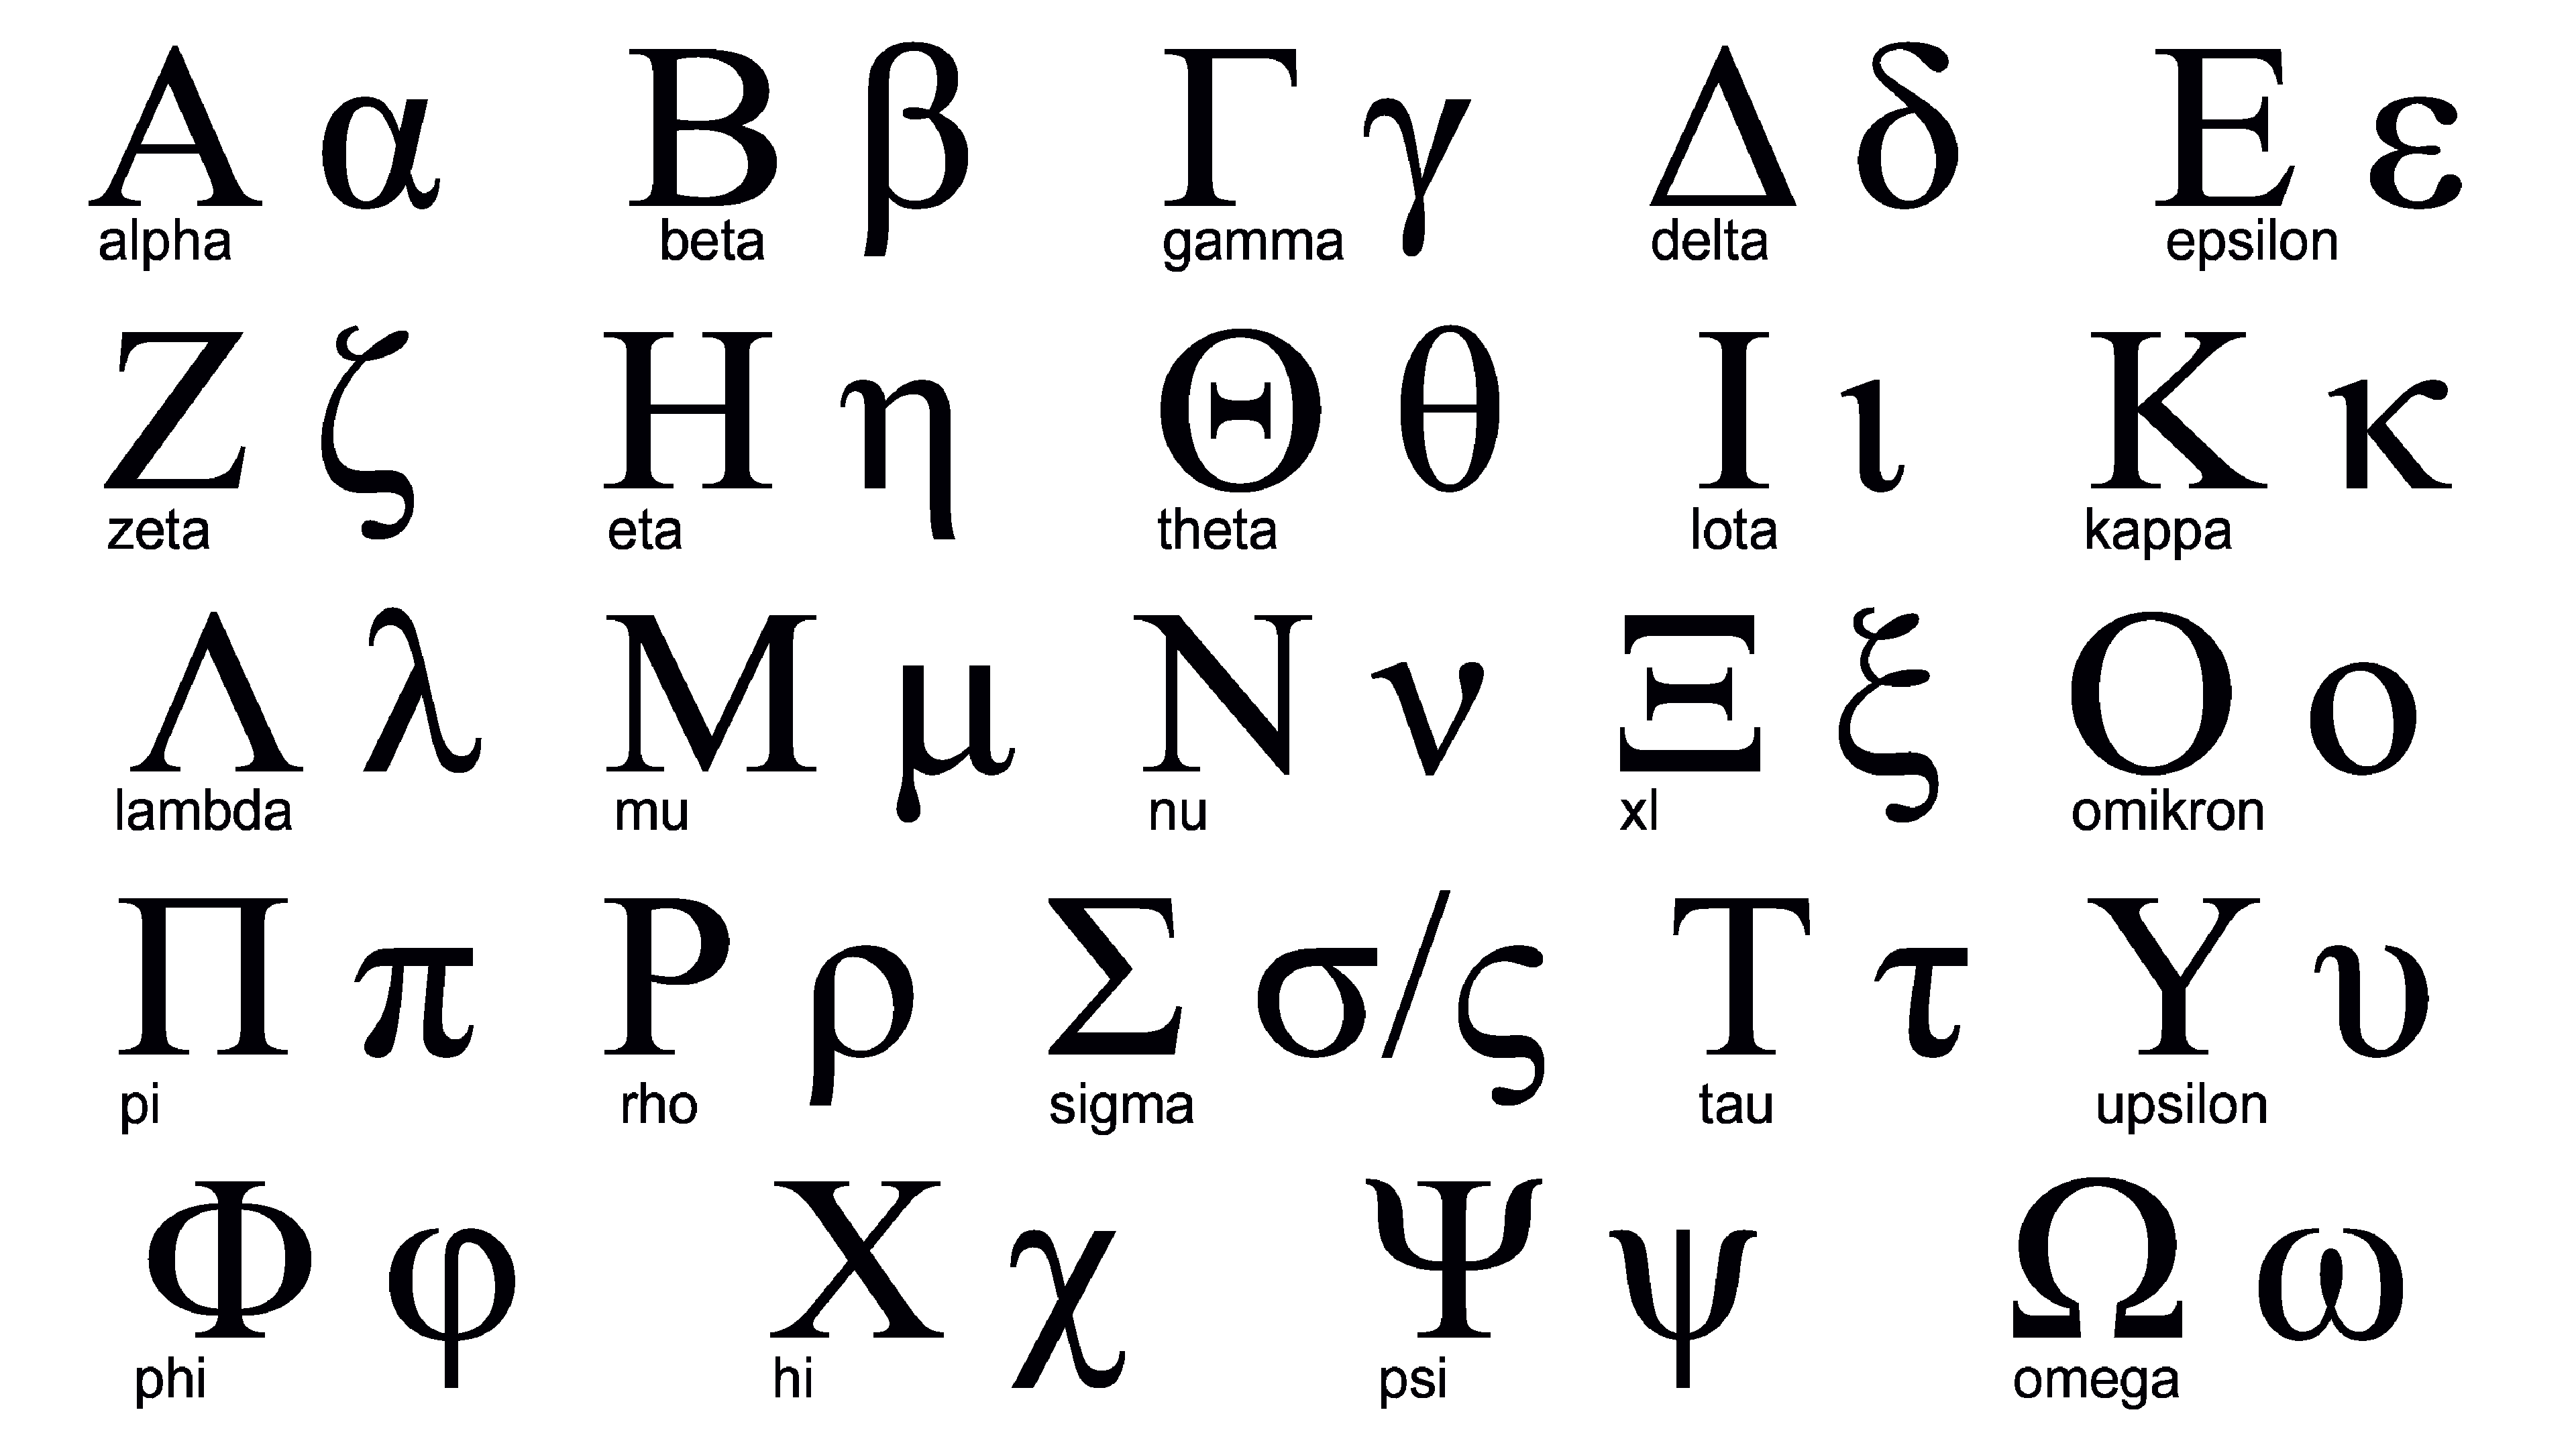 the 10th letter of the greek alphabet